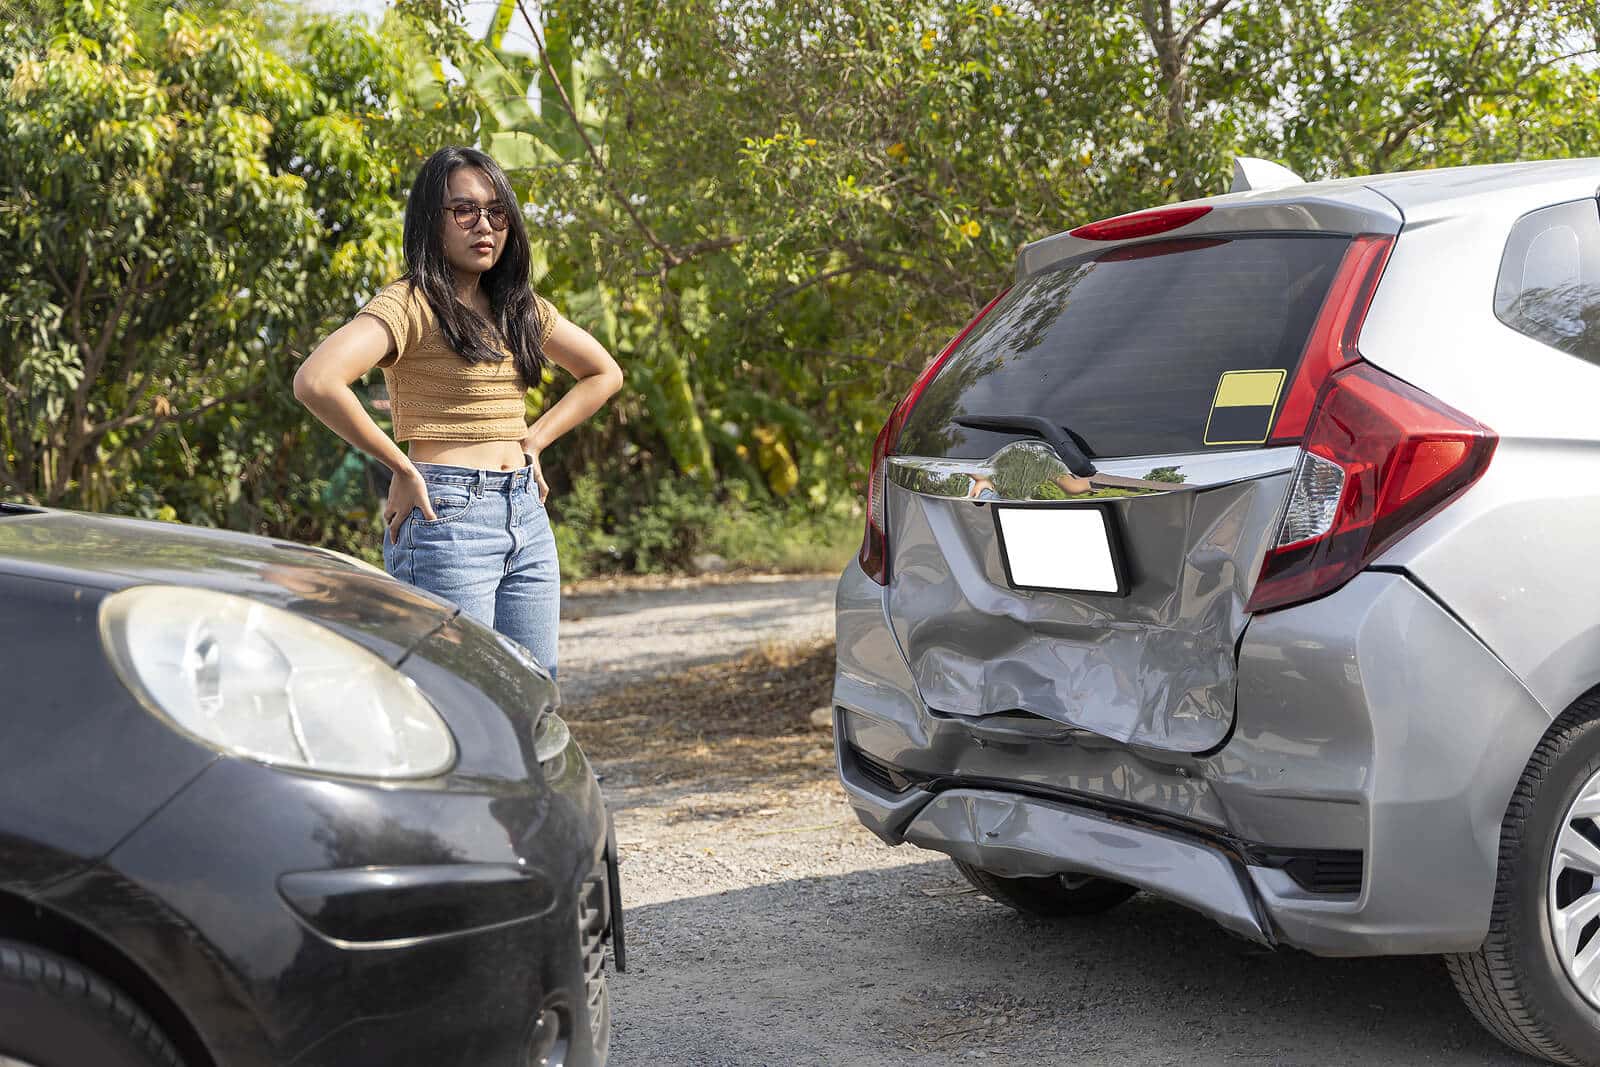 Most Dangerous Times for Car Accidents